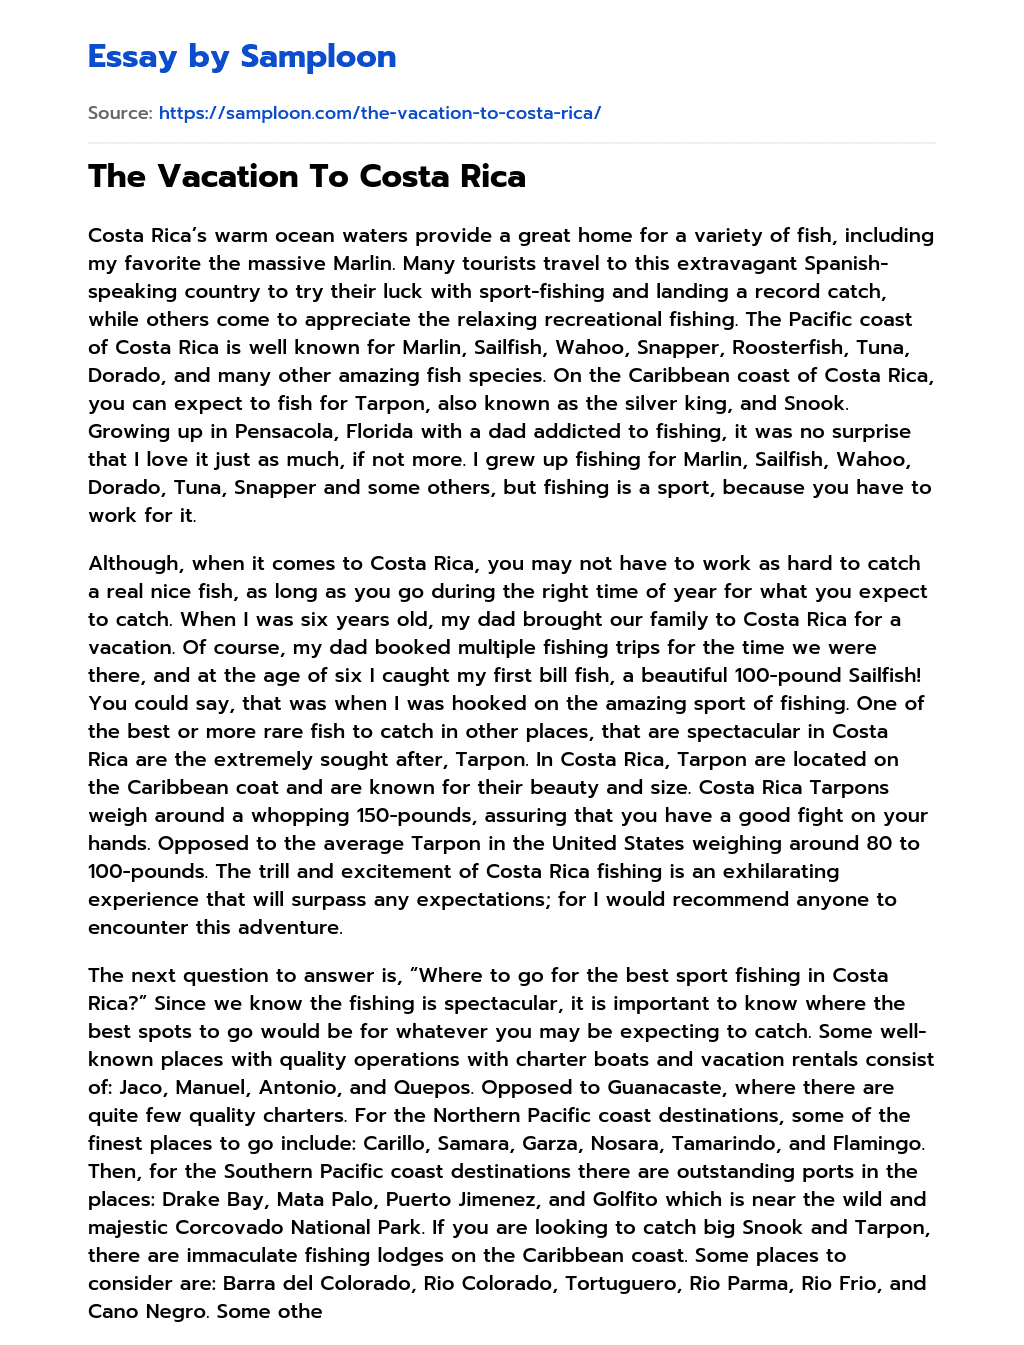 The Vacation To Costa Rica essay